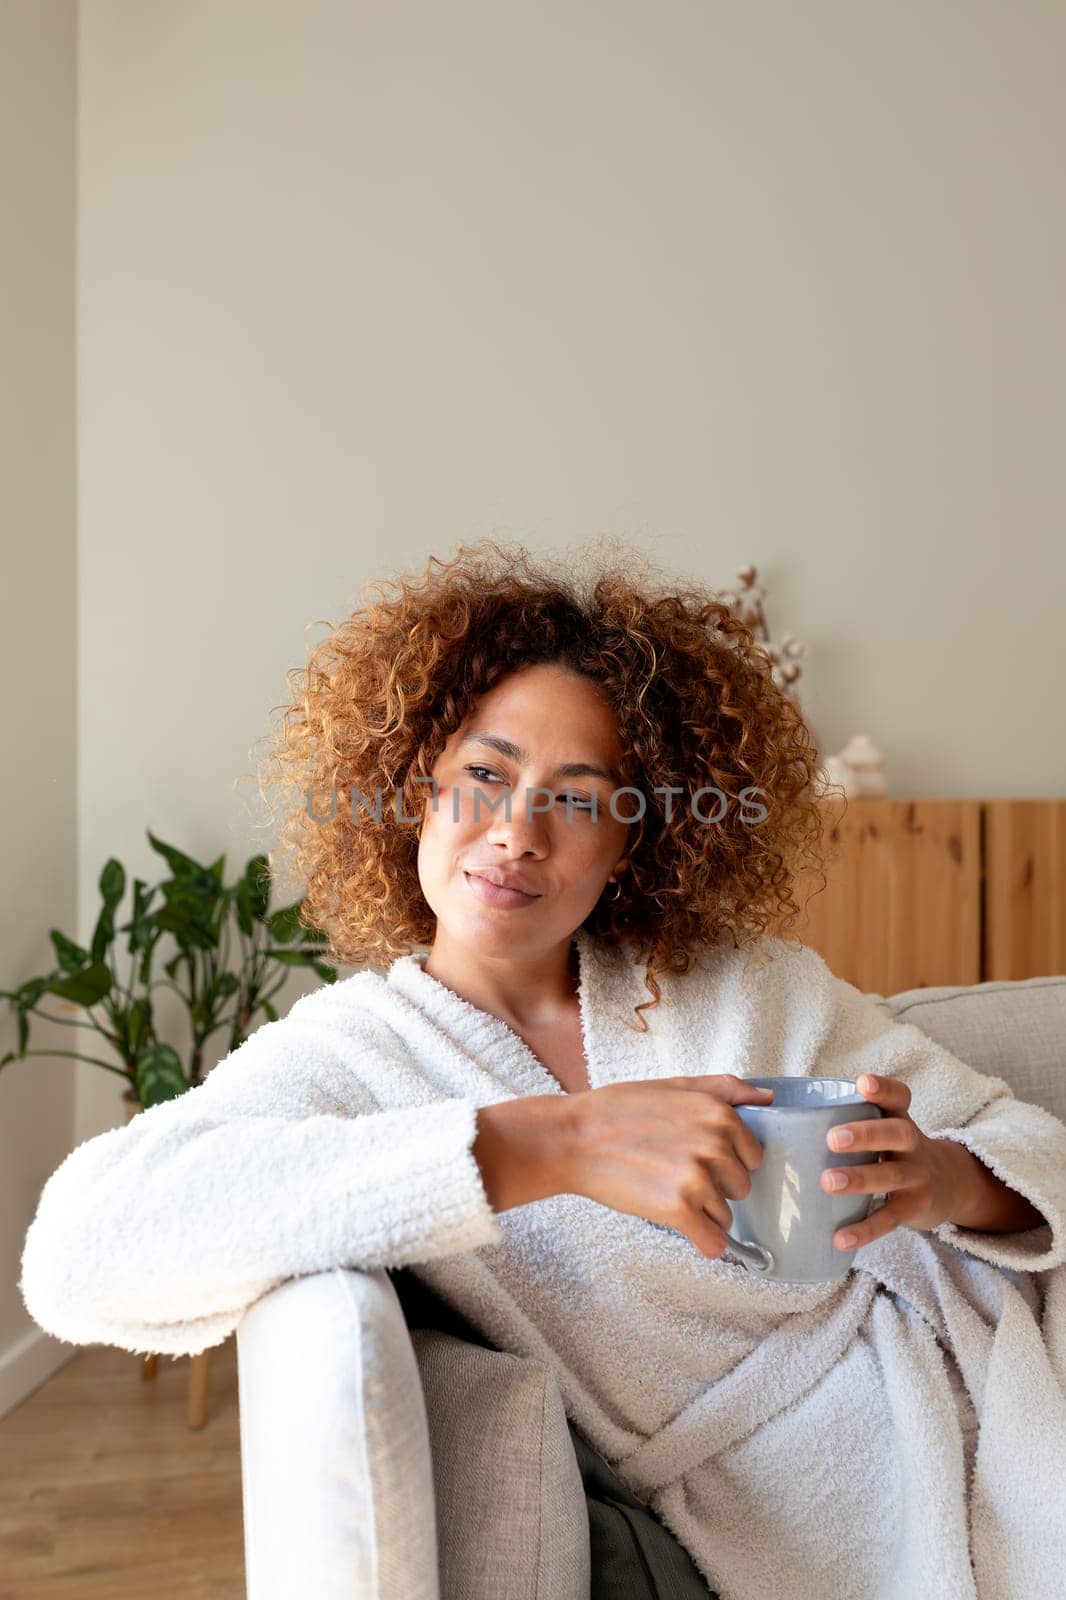 Pensive multiracial woman relaxing at home, sitting on the sofa drinking tea looking out the window. Copy space. Vertical image. Lifestyle concept.